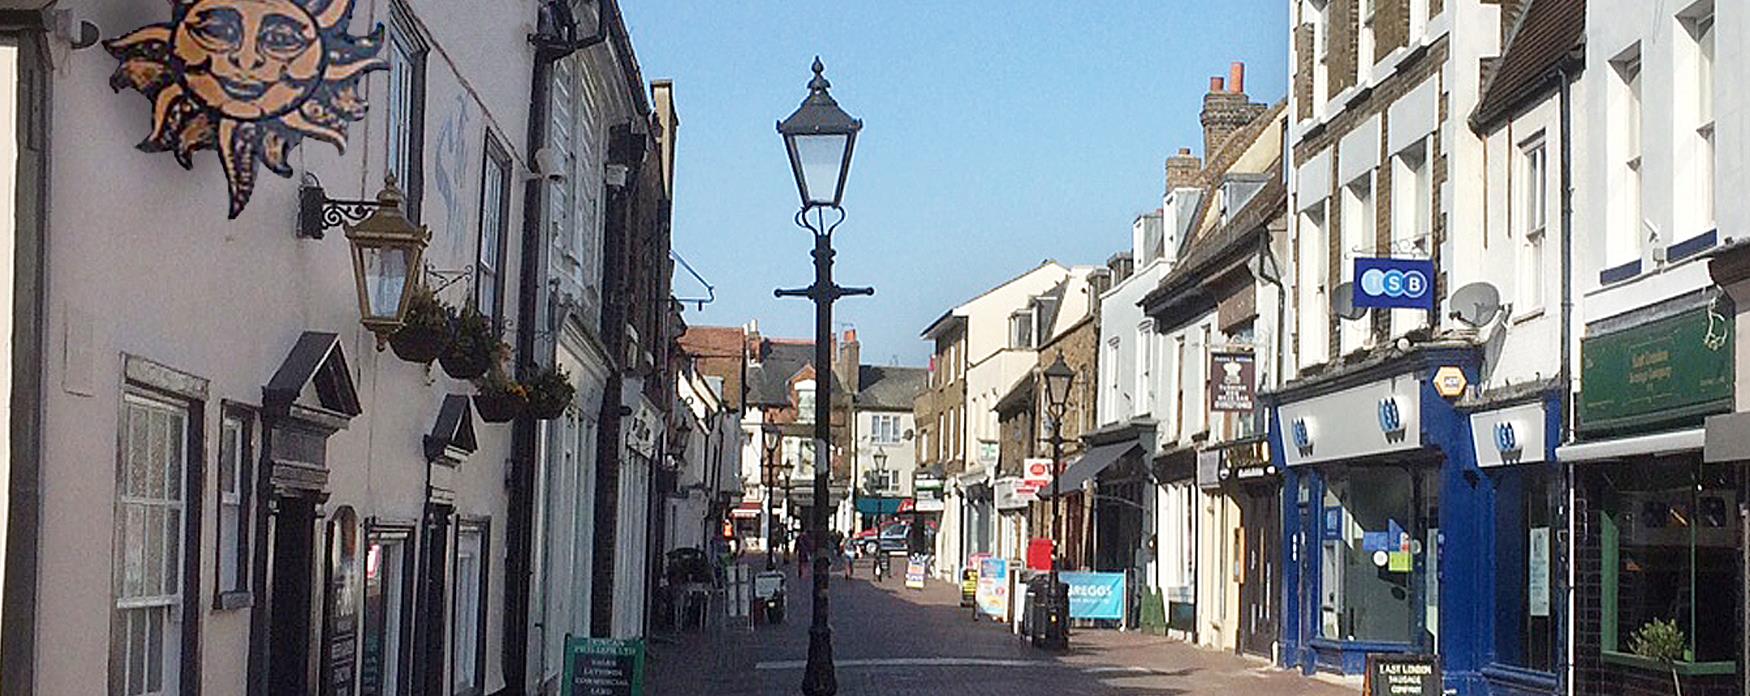 Ongar, one of six towns in Epping Forest District, each with their own character.